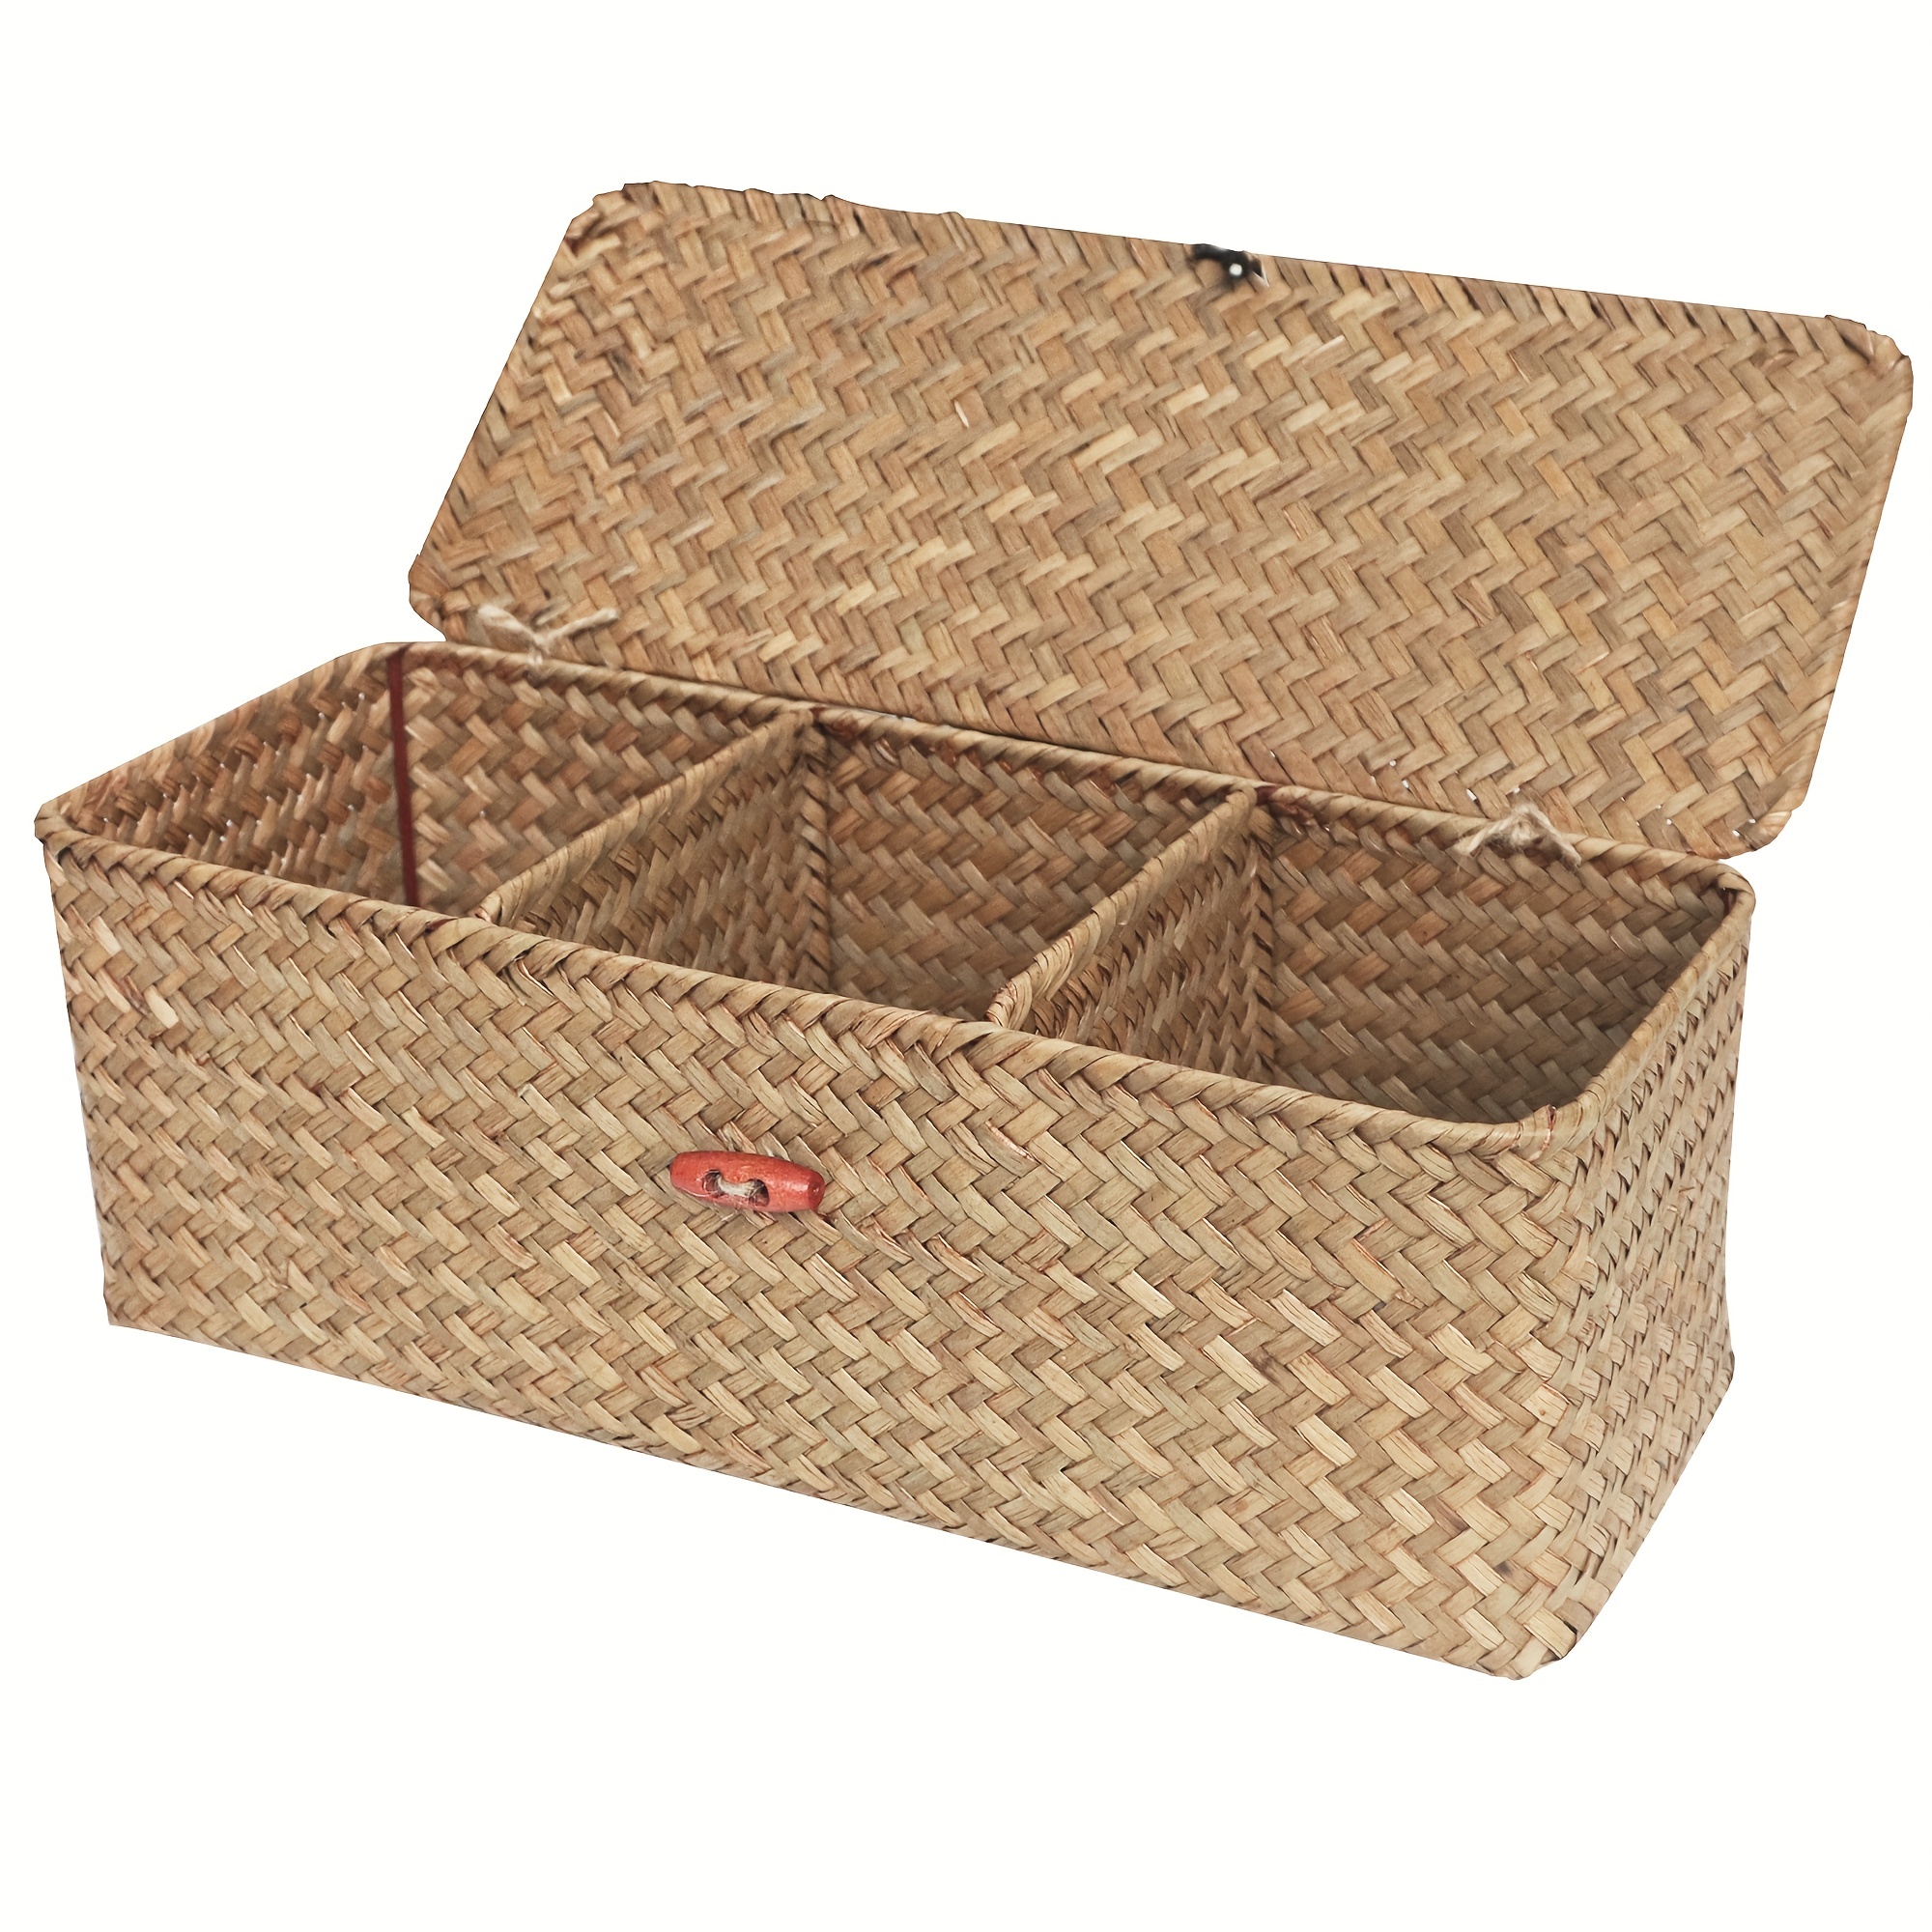 

1pc Multipurpose Wicker Woven Storage Basket With Lid - 3-grid Sorting Organizer For Home, Bathroom, Bedroom, Living Room - Boho Style Decor